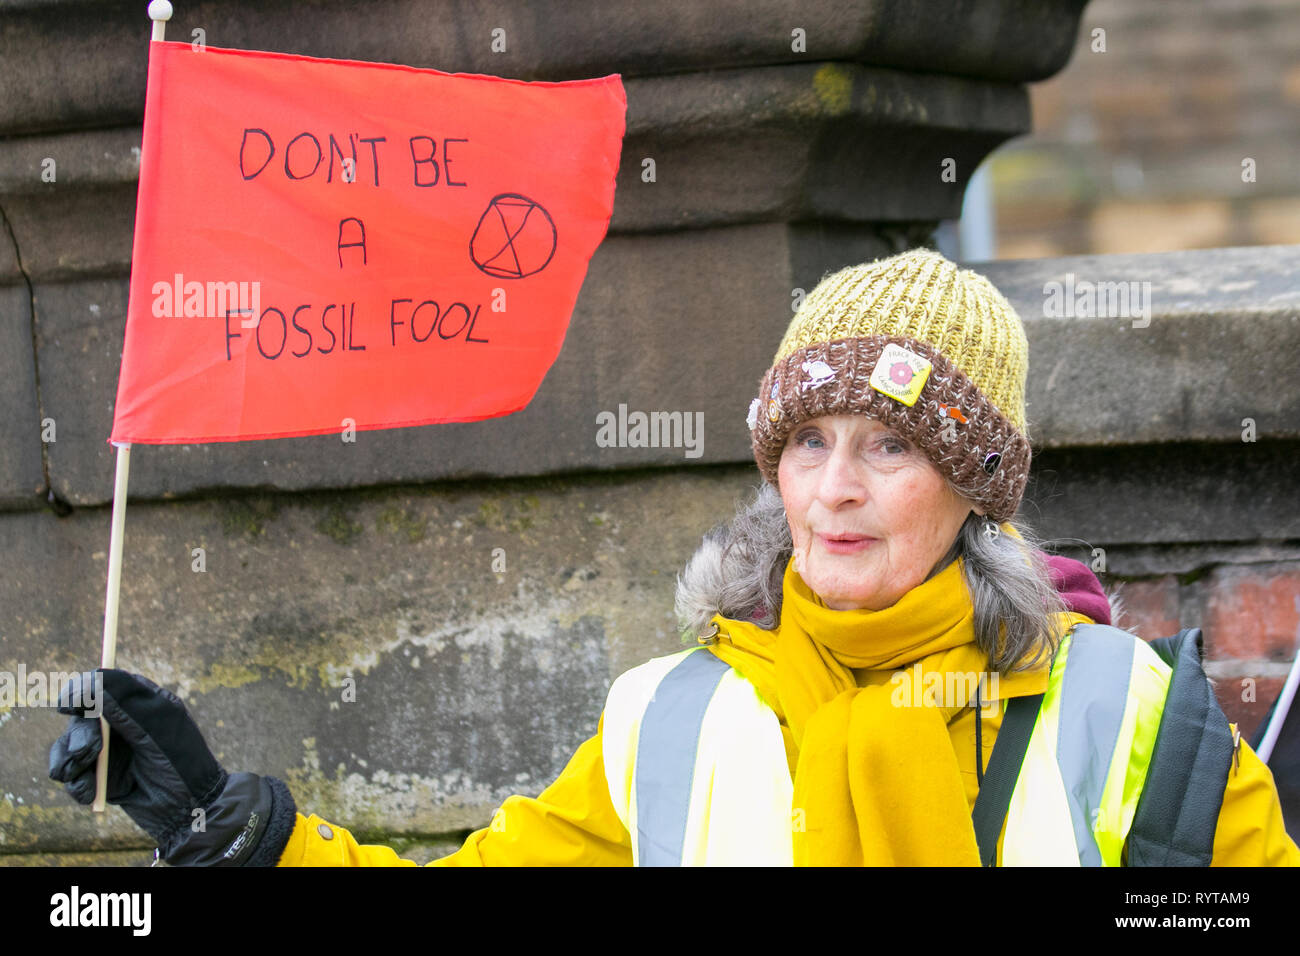 Preston, Lancashire. 15th March, 2019. Pauline waving a red flag 'Don't be a fossil fool' at the School strike 4 Climate change, as parents and school children assemble outside the railway station with banners and placards protesting for action against climate change.  The demonstrators marched through the city centre to continue their protest at the Flag Market in the city centre. Children from around Lancashire have walked out of classes today as part of an international Climate Strike. Credit:MWI/AlamyLiveNews Stock Photo